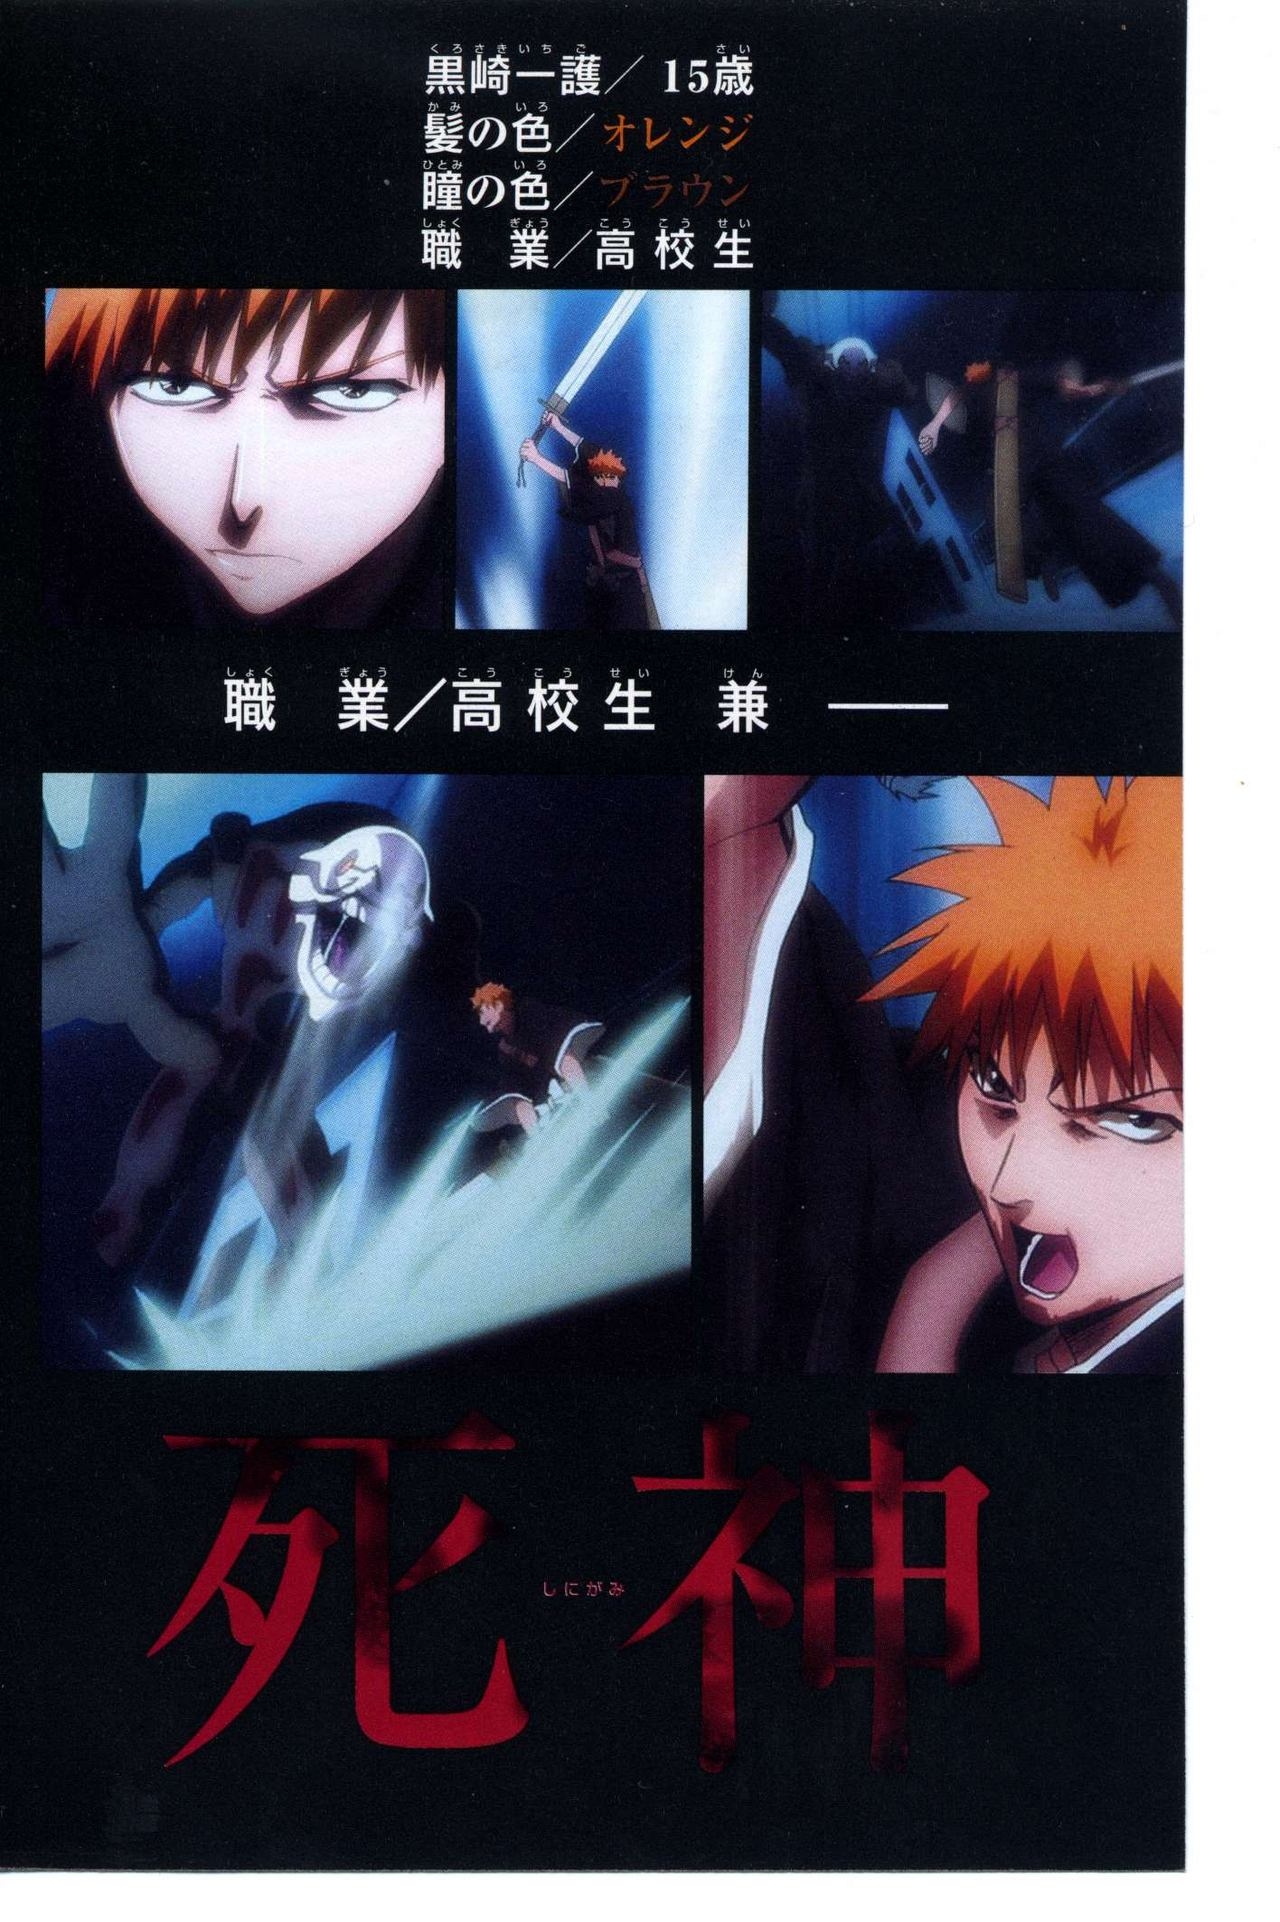 Bleach: Official Animation Book VIBEs 14